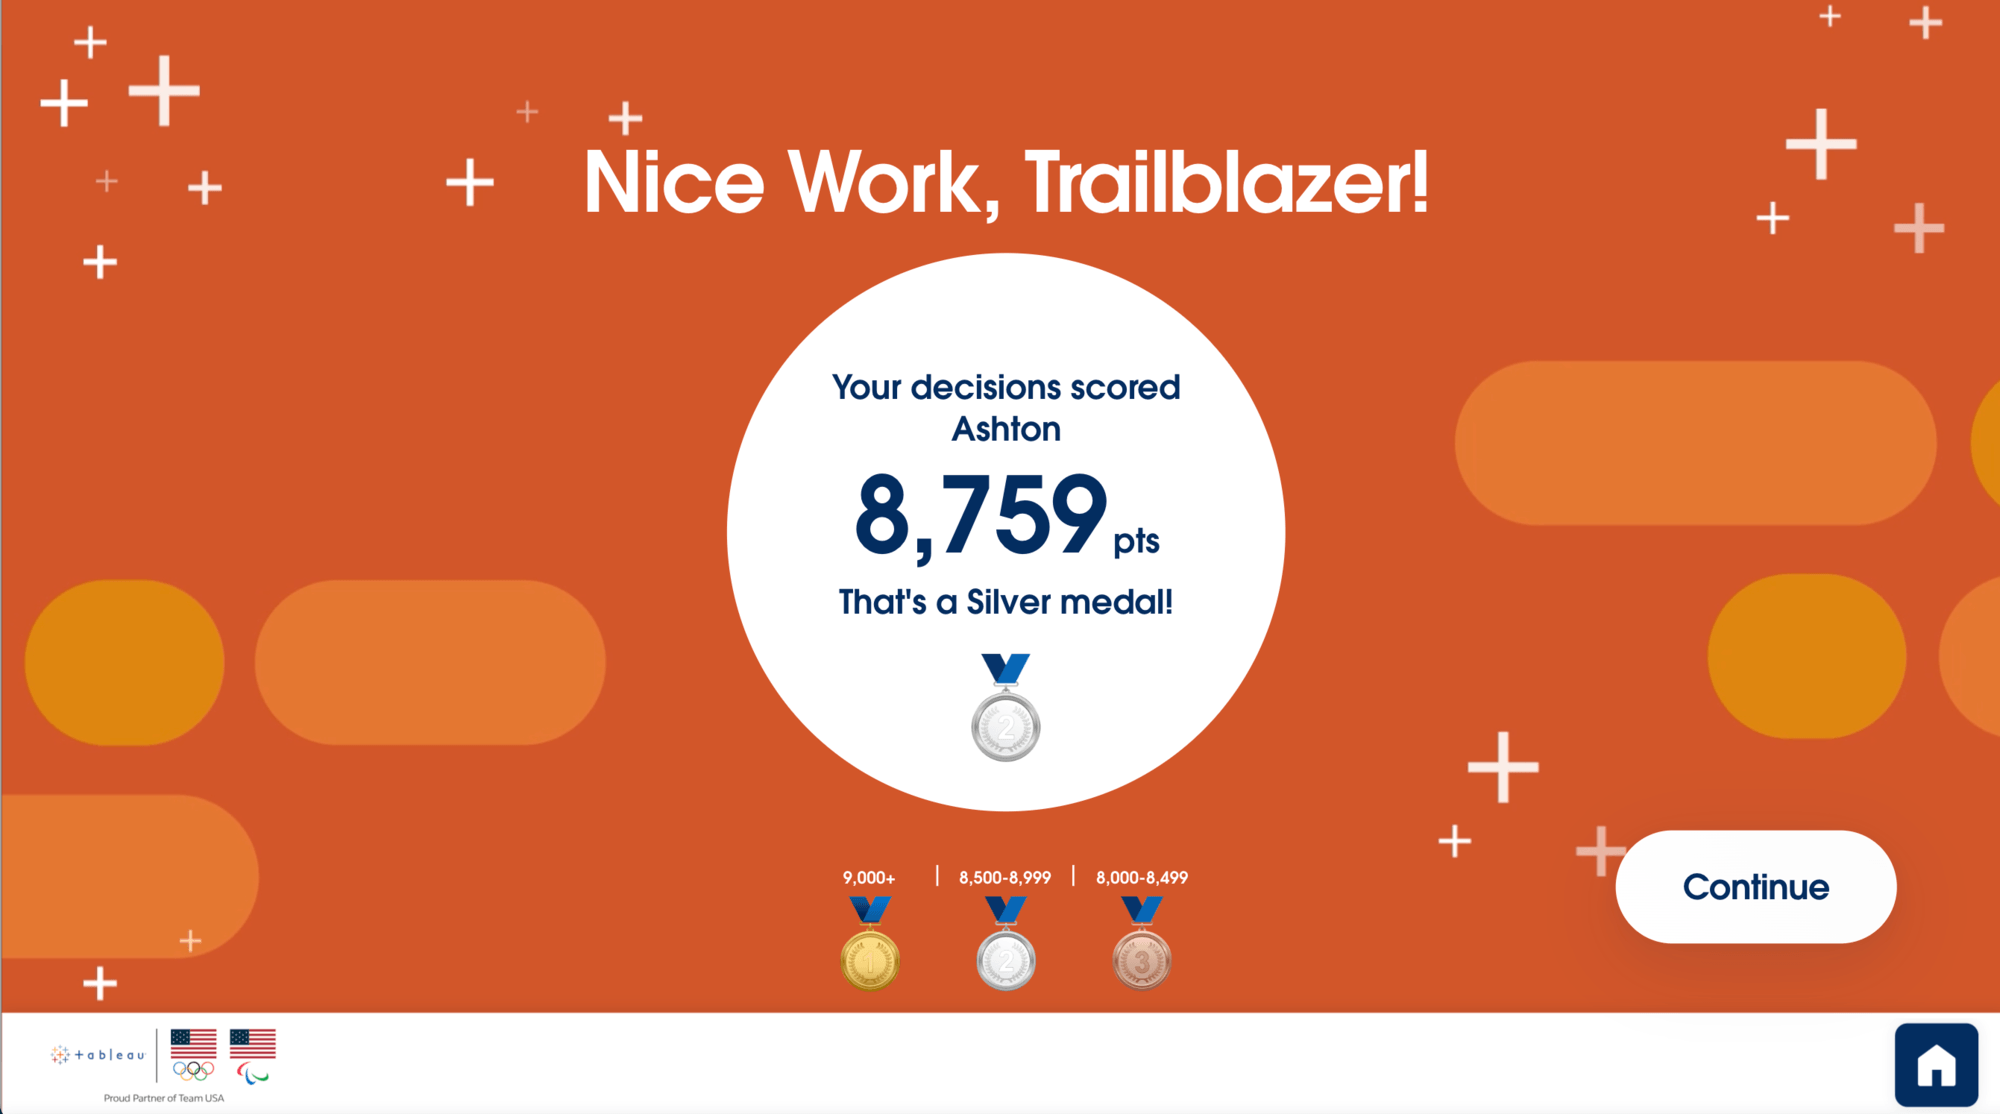 This image shows interactive content from Dreamforce 2023, providing the user’s decathlon score after providing inputs on the last screen.